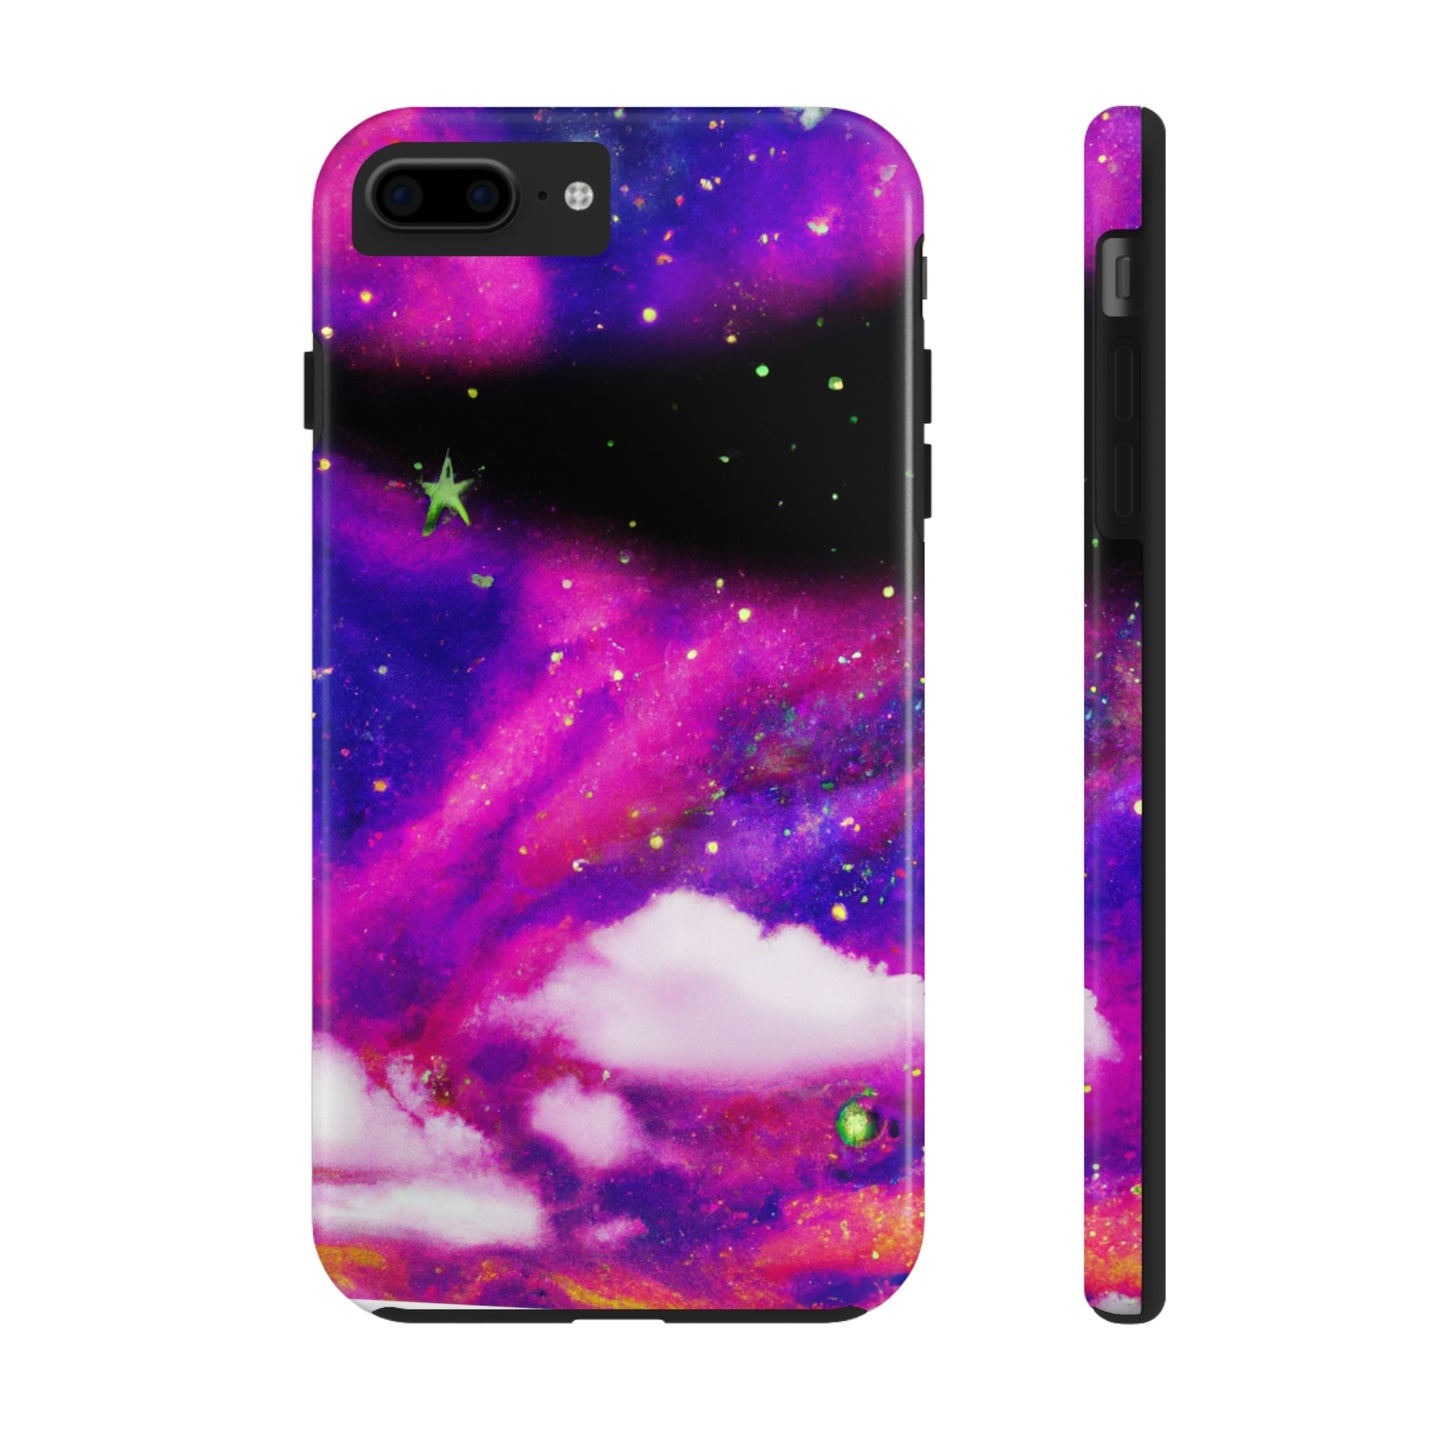 "Starry Night Symphony" - The Alien Tough Phone Cases